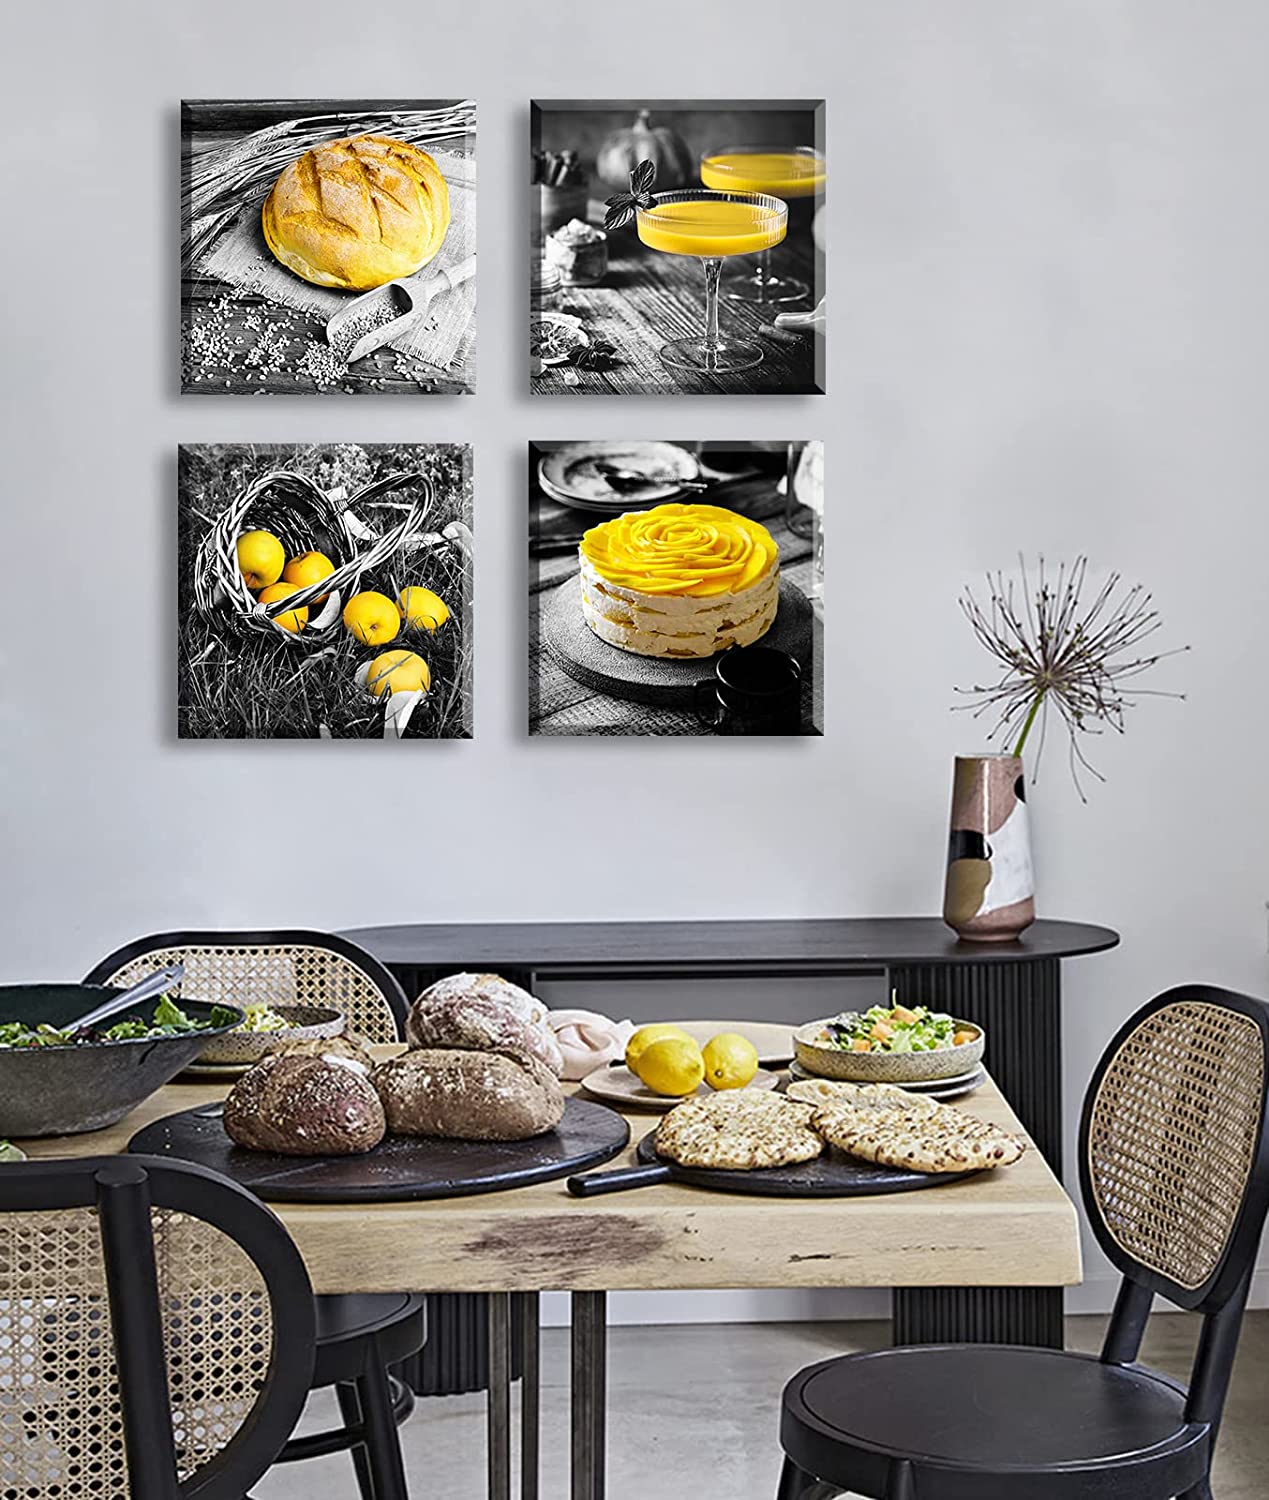 Kitchen Wall Decor Black and White Yellow Wall Art Bread Cake Fruit Picture Canvas  Print Paintings for Cafe Dining Room Restaurant Farmhouse Kitchen Decoration  12" Wx12 Hx4